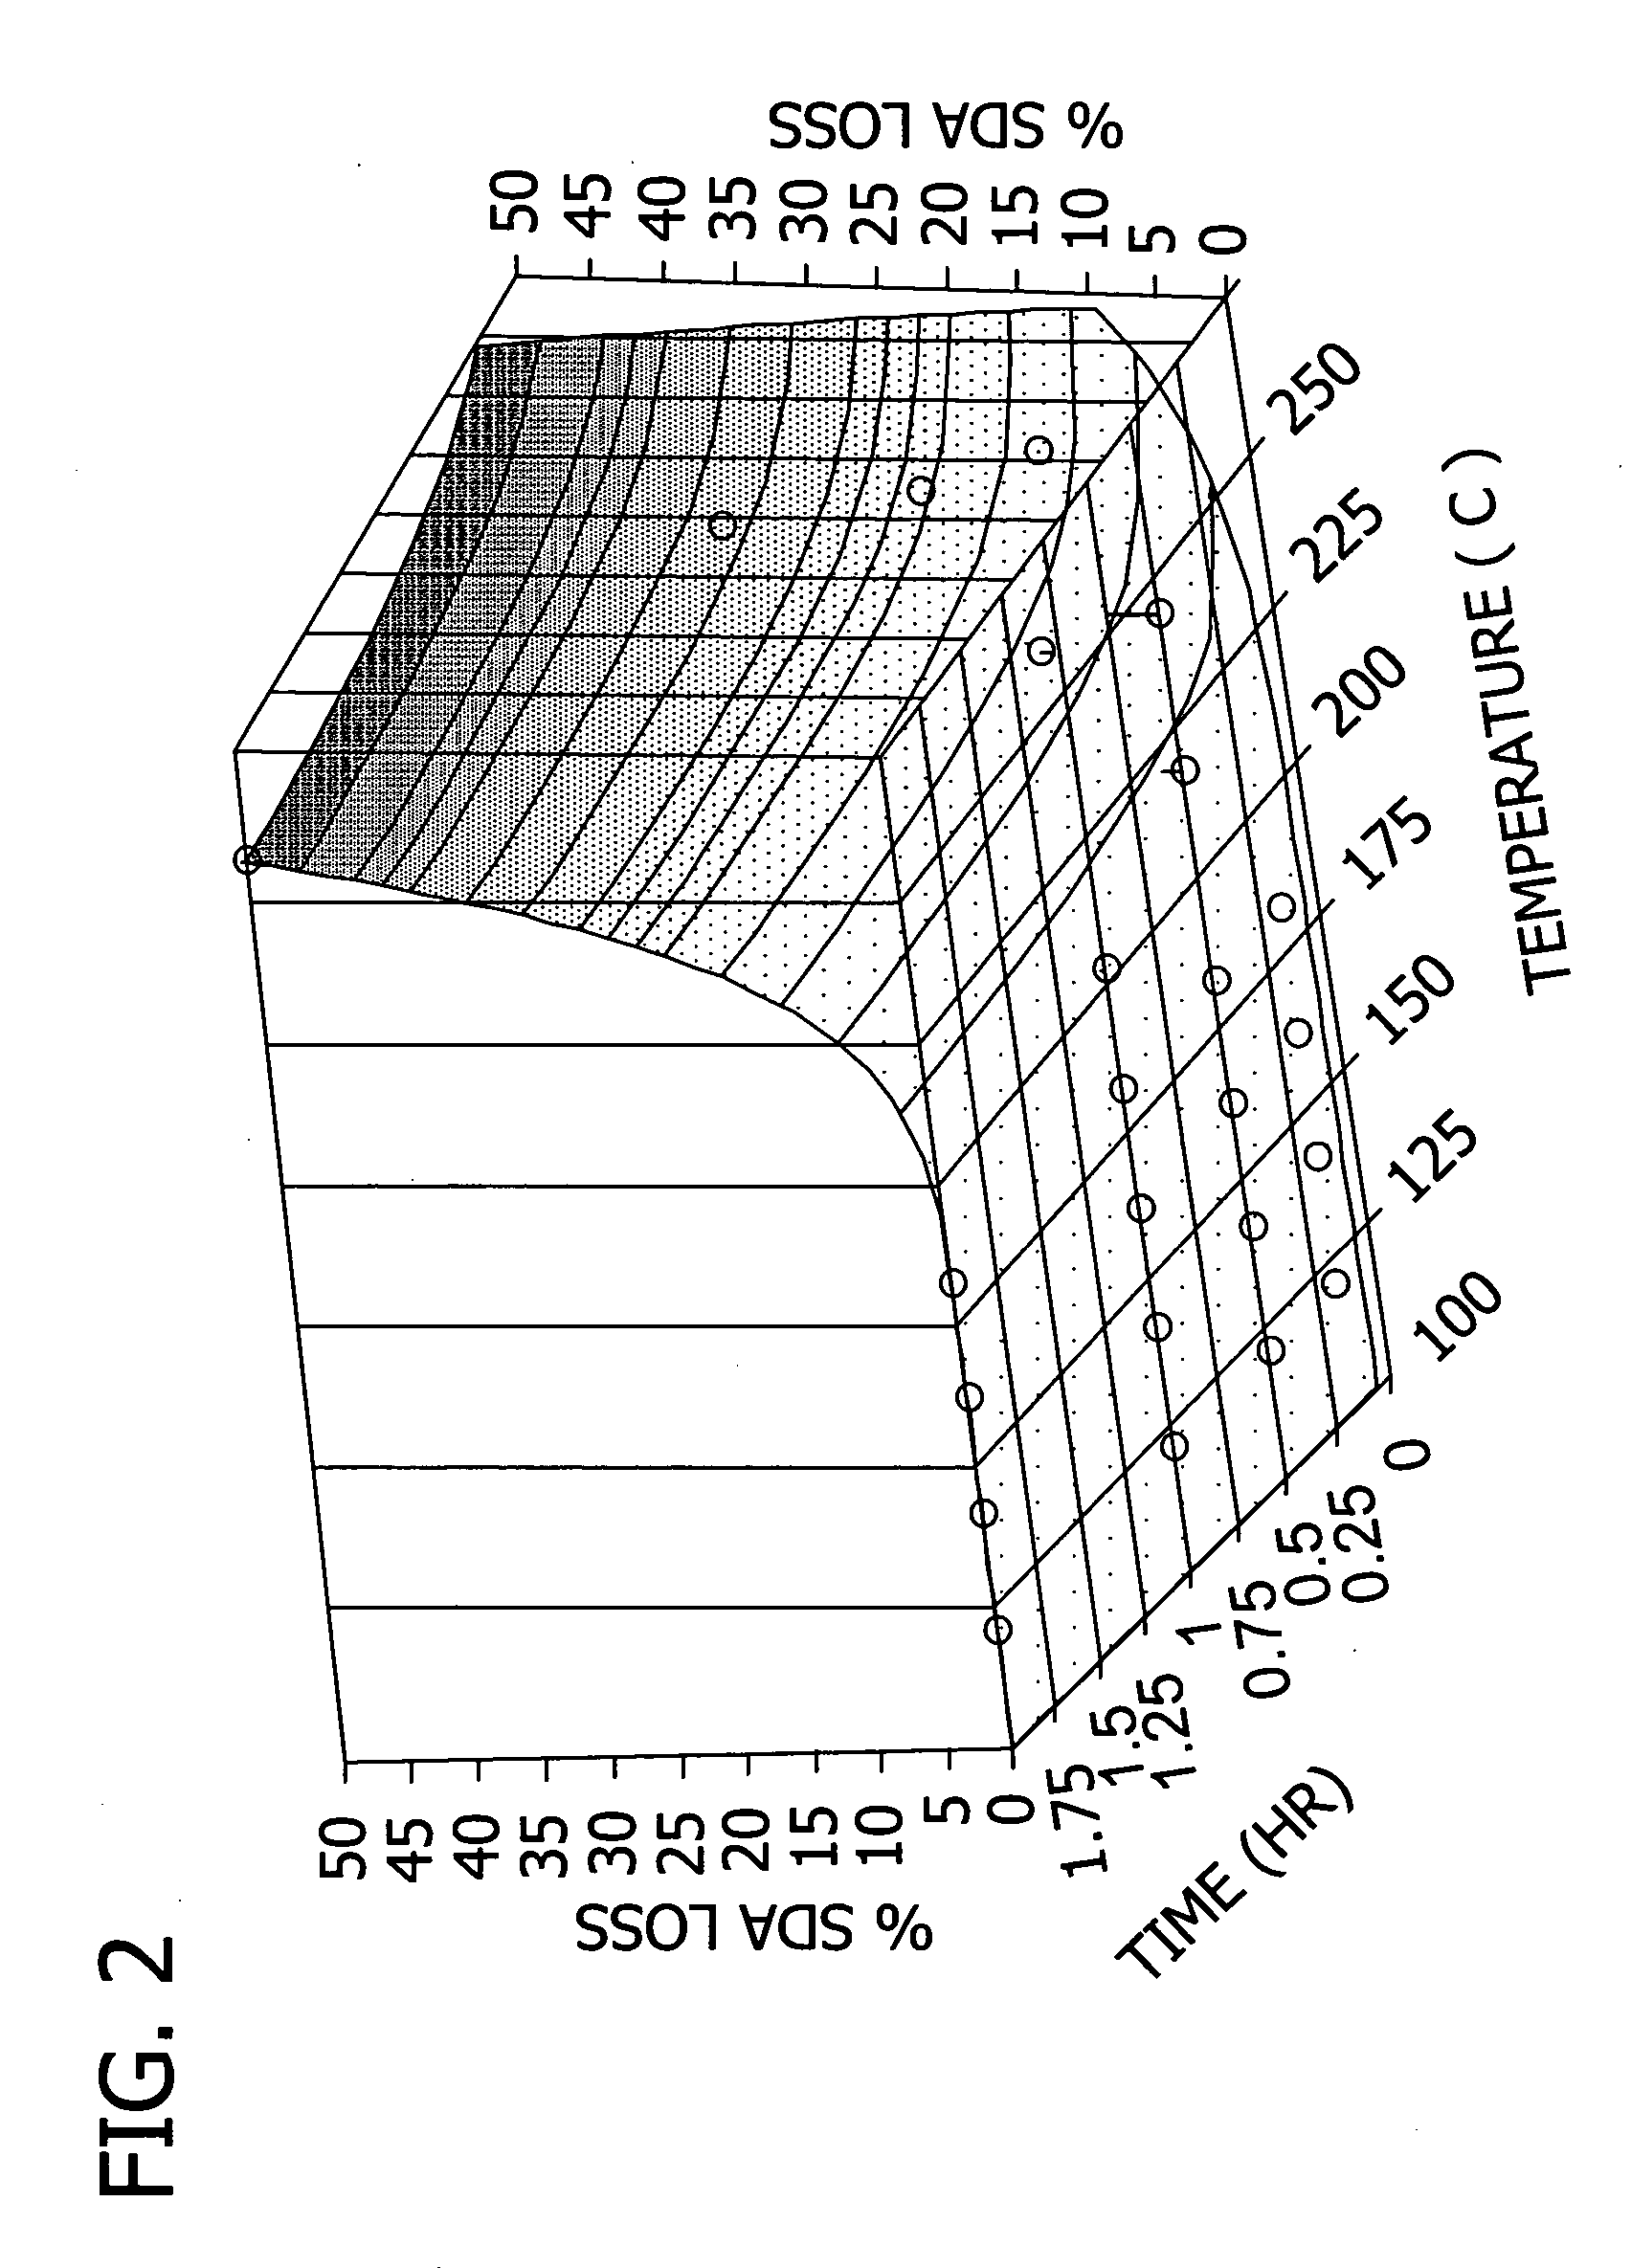 Processes for preparation of oil compositions